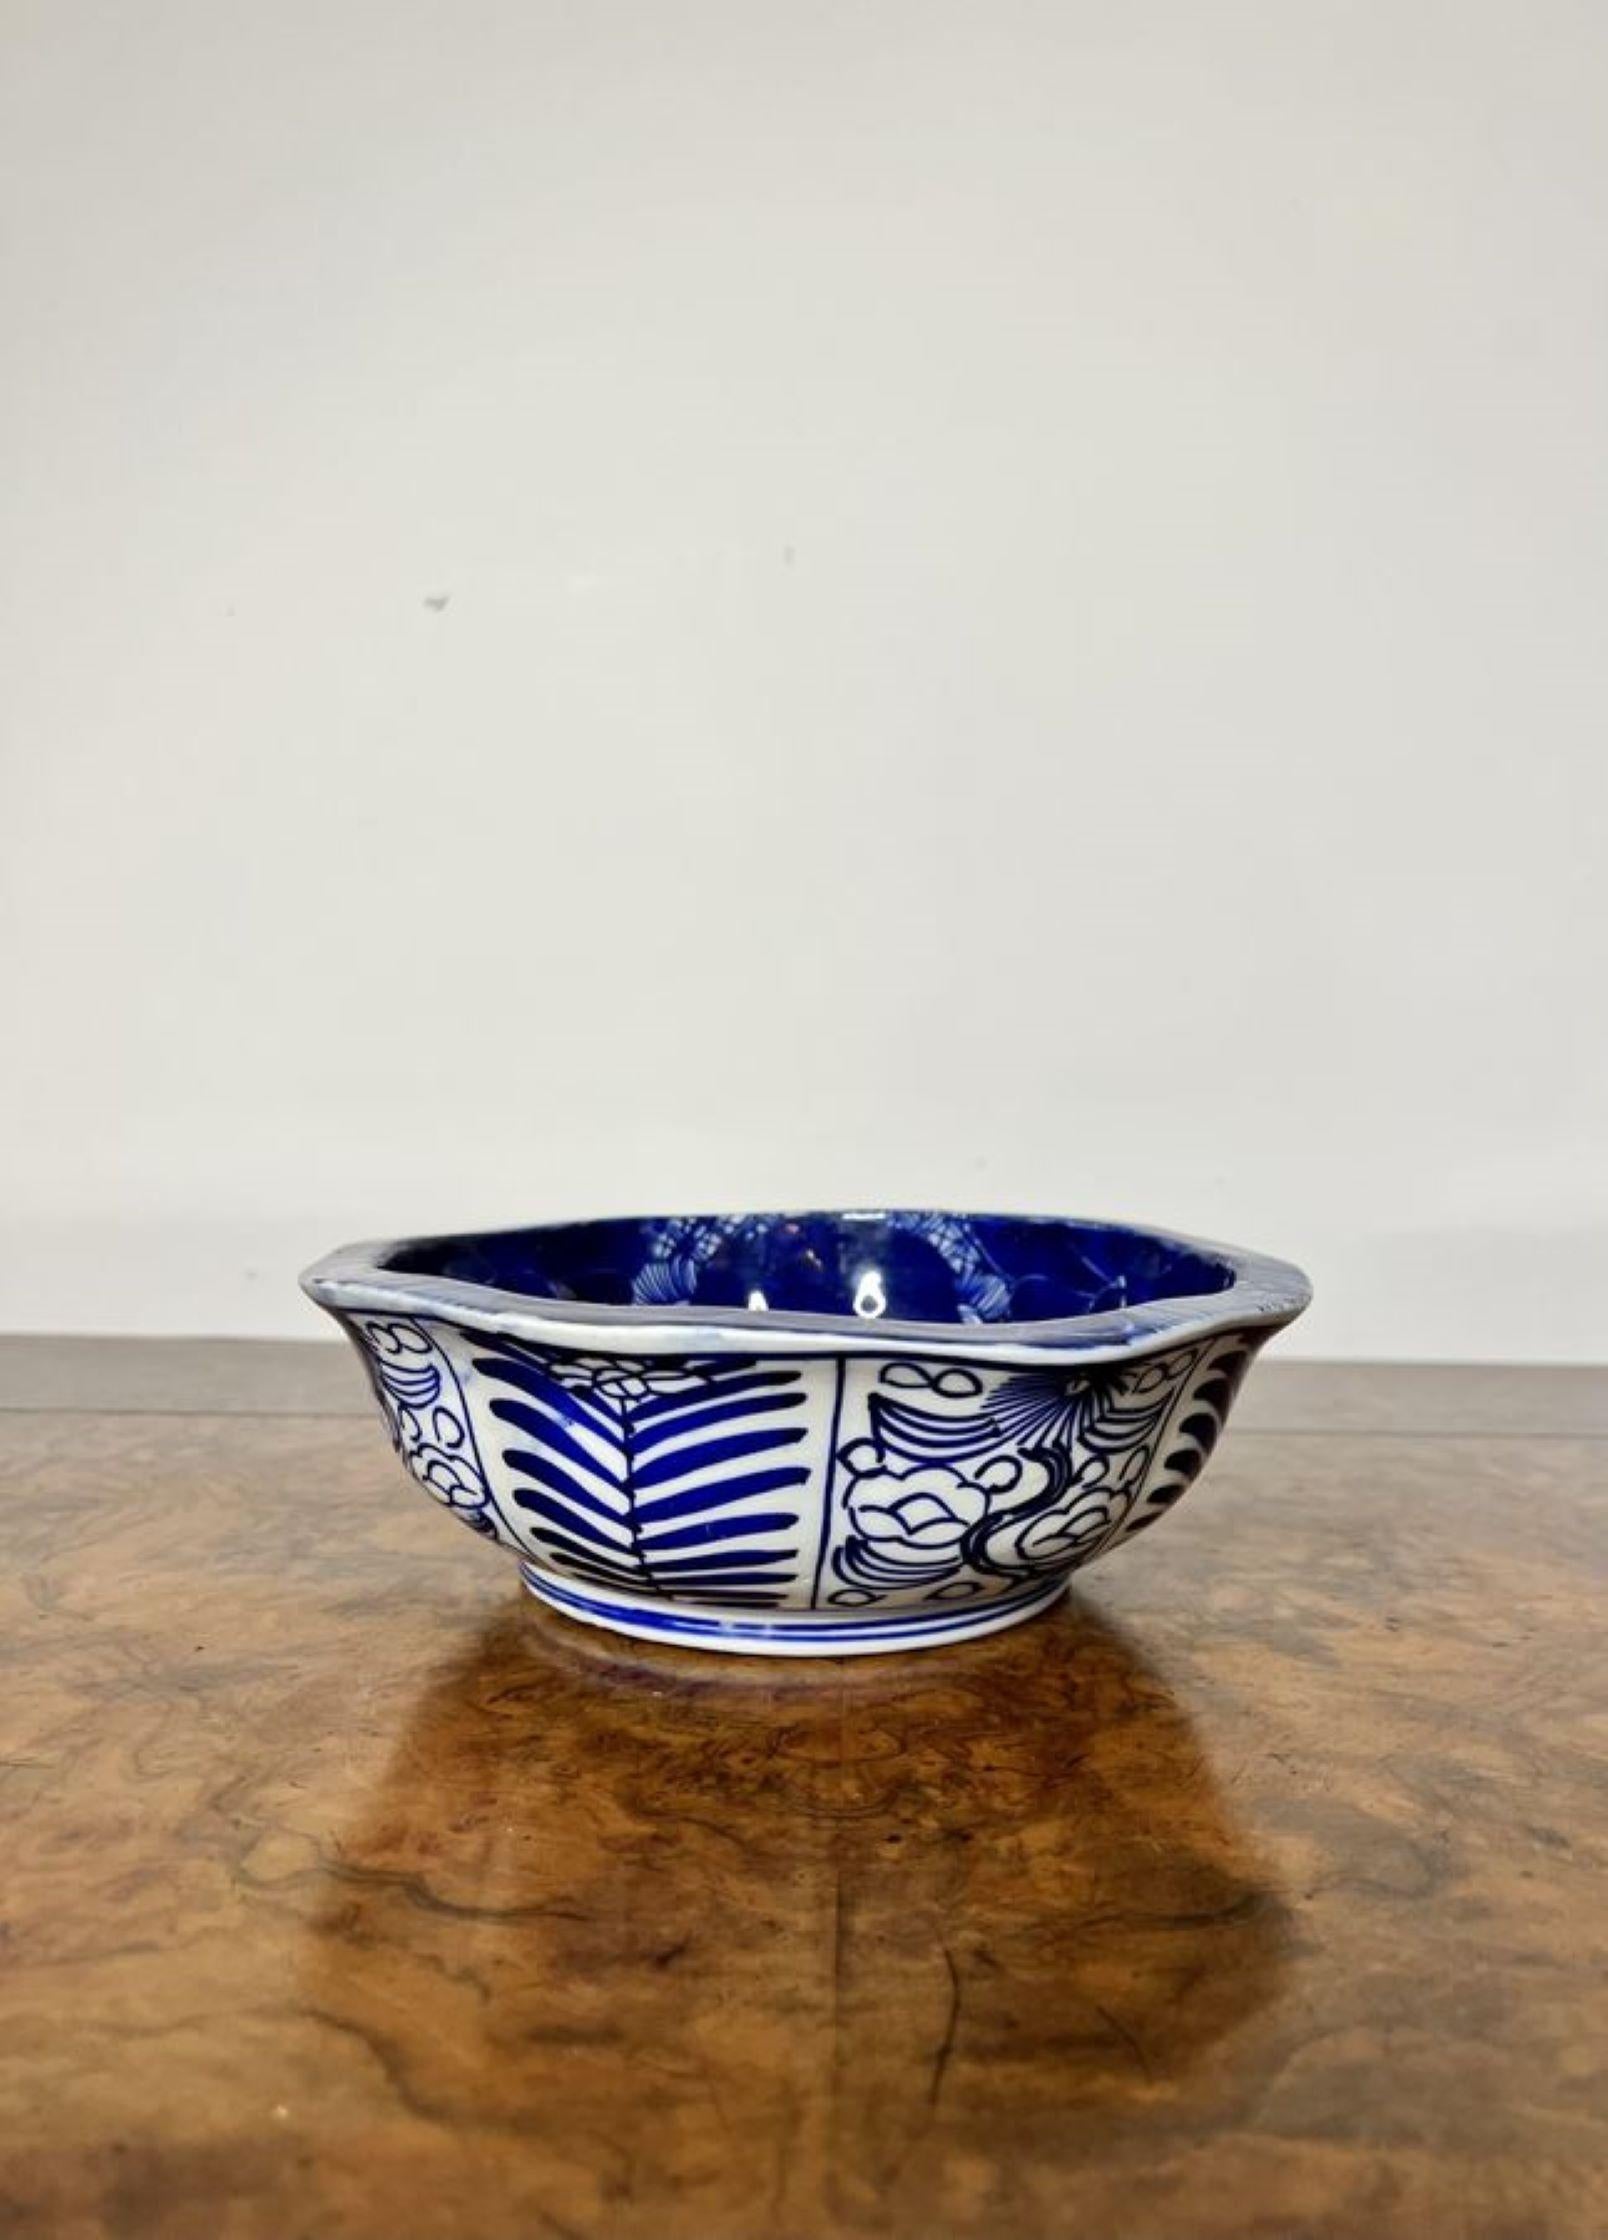 Quality antique Japanese 19th Century blue and white porcelain bowl, circular in shape with a lobed top, decorated throughout in hand painted blue and white colours with panels of flowers and patterns and a centre scene to the inside of the